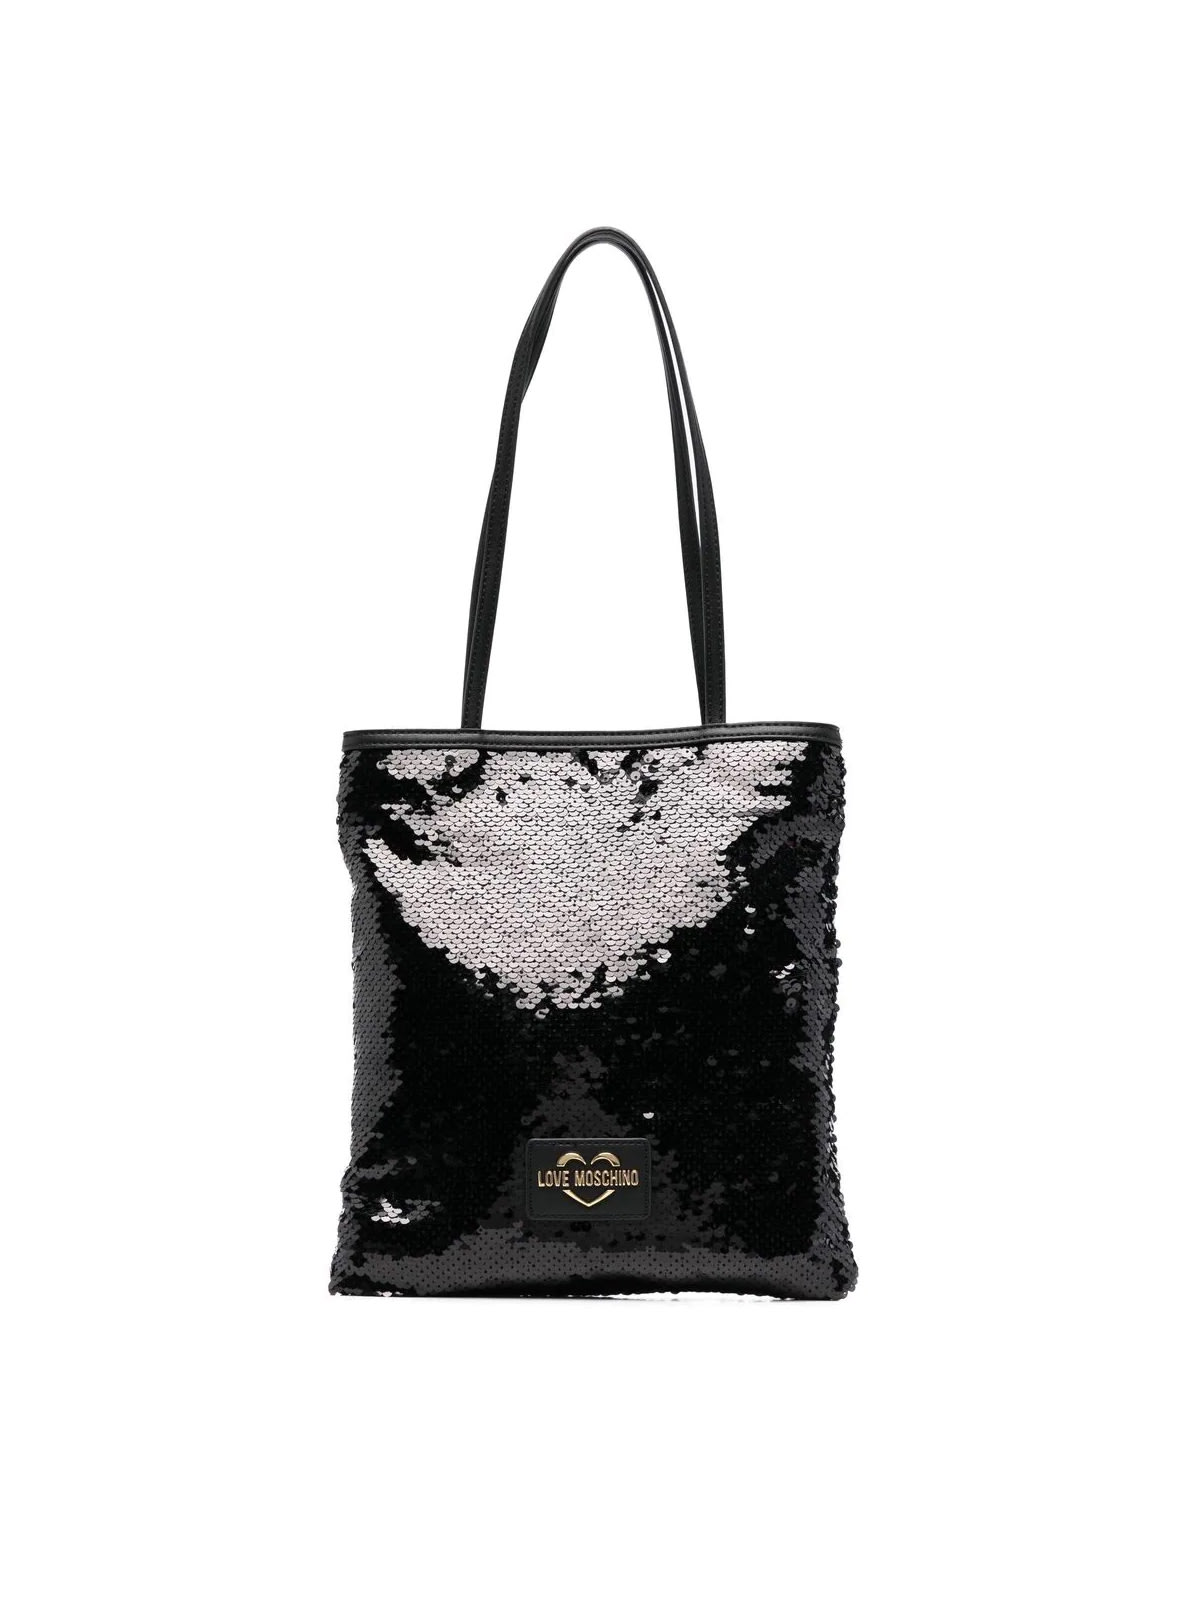 Love Moschino Sequined Tote